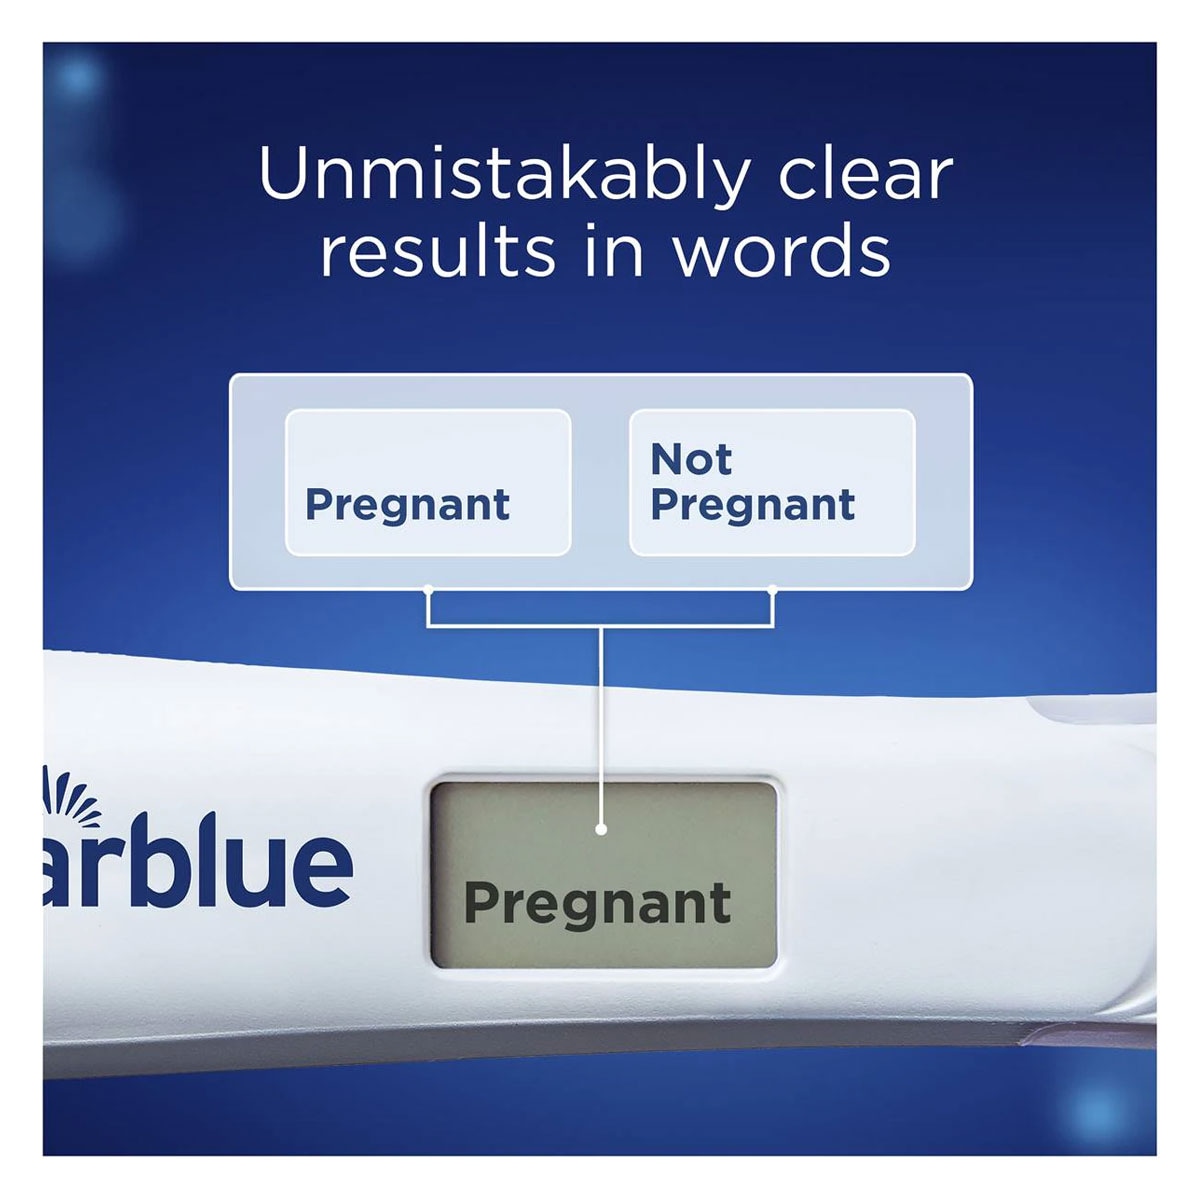 Clearblue Digital Ultra Early (6 Days) Pregnancy Test 1 Pack